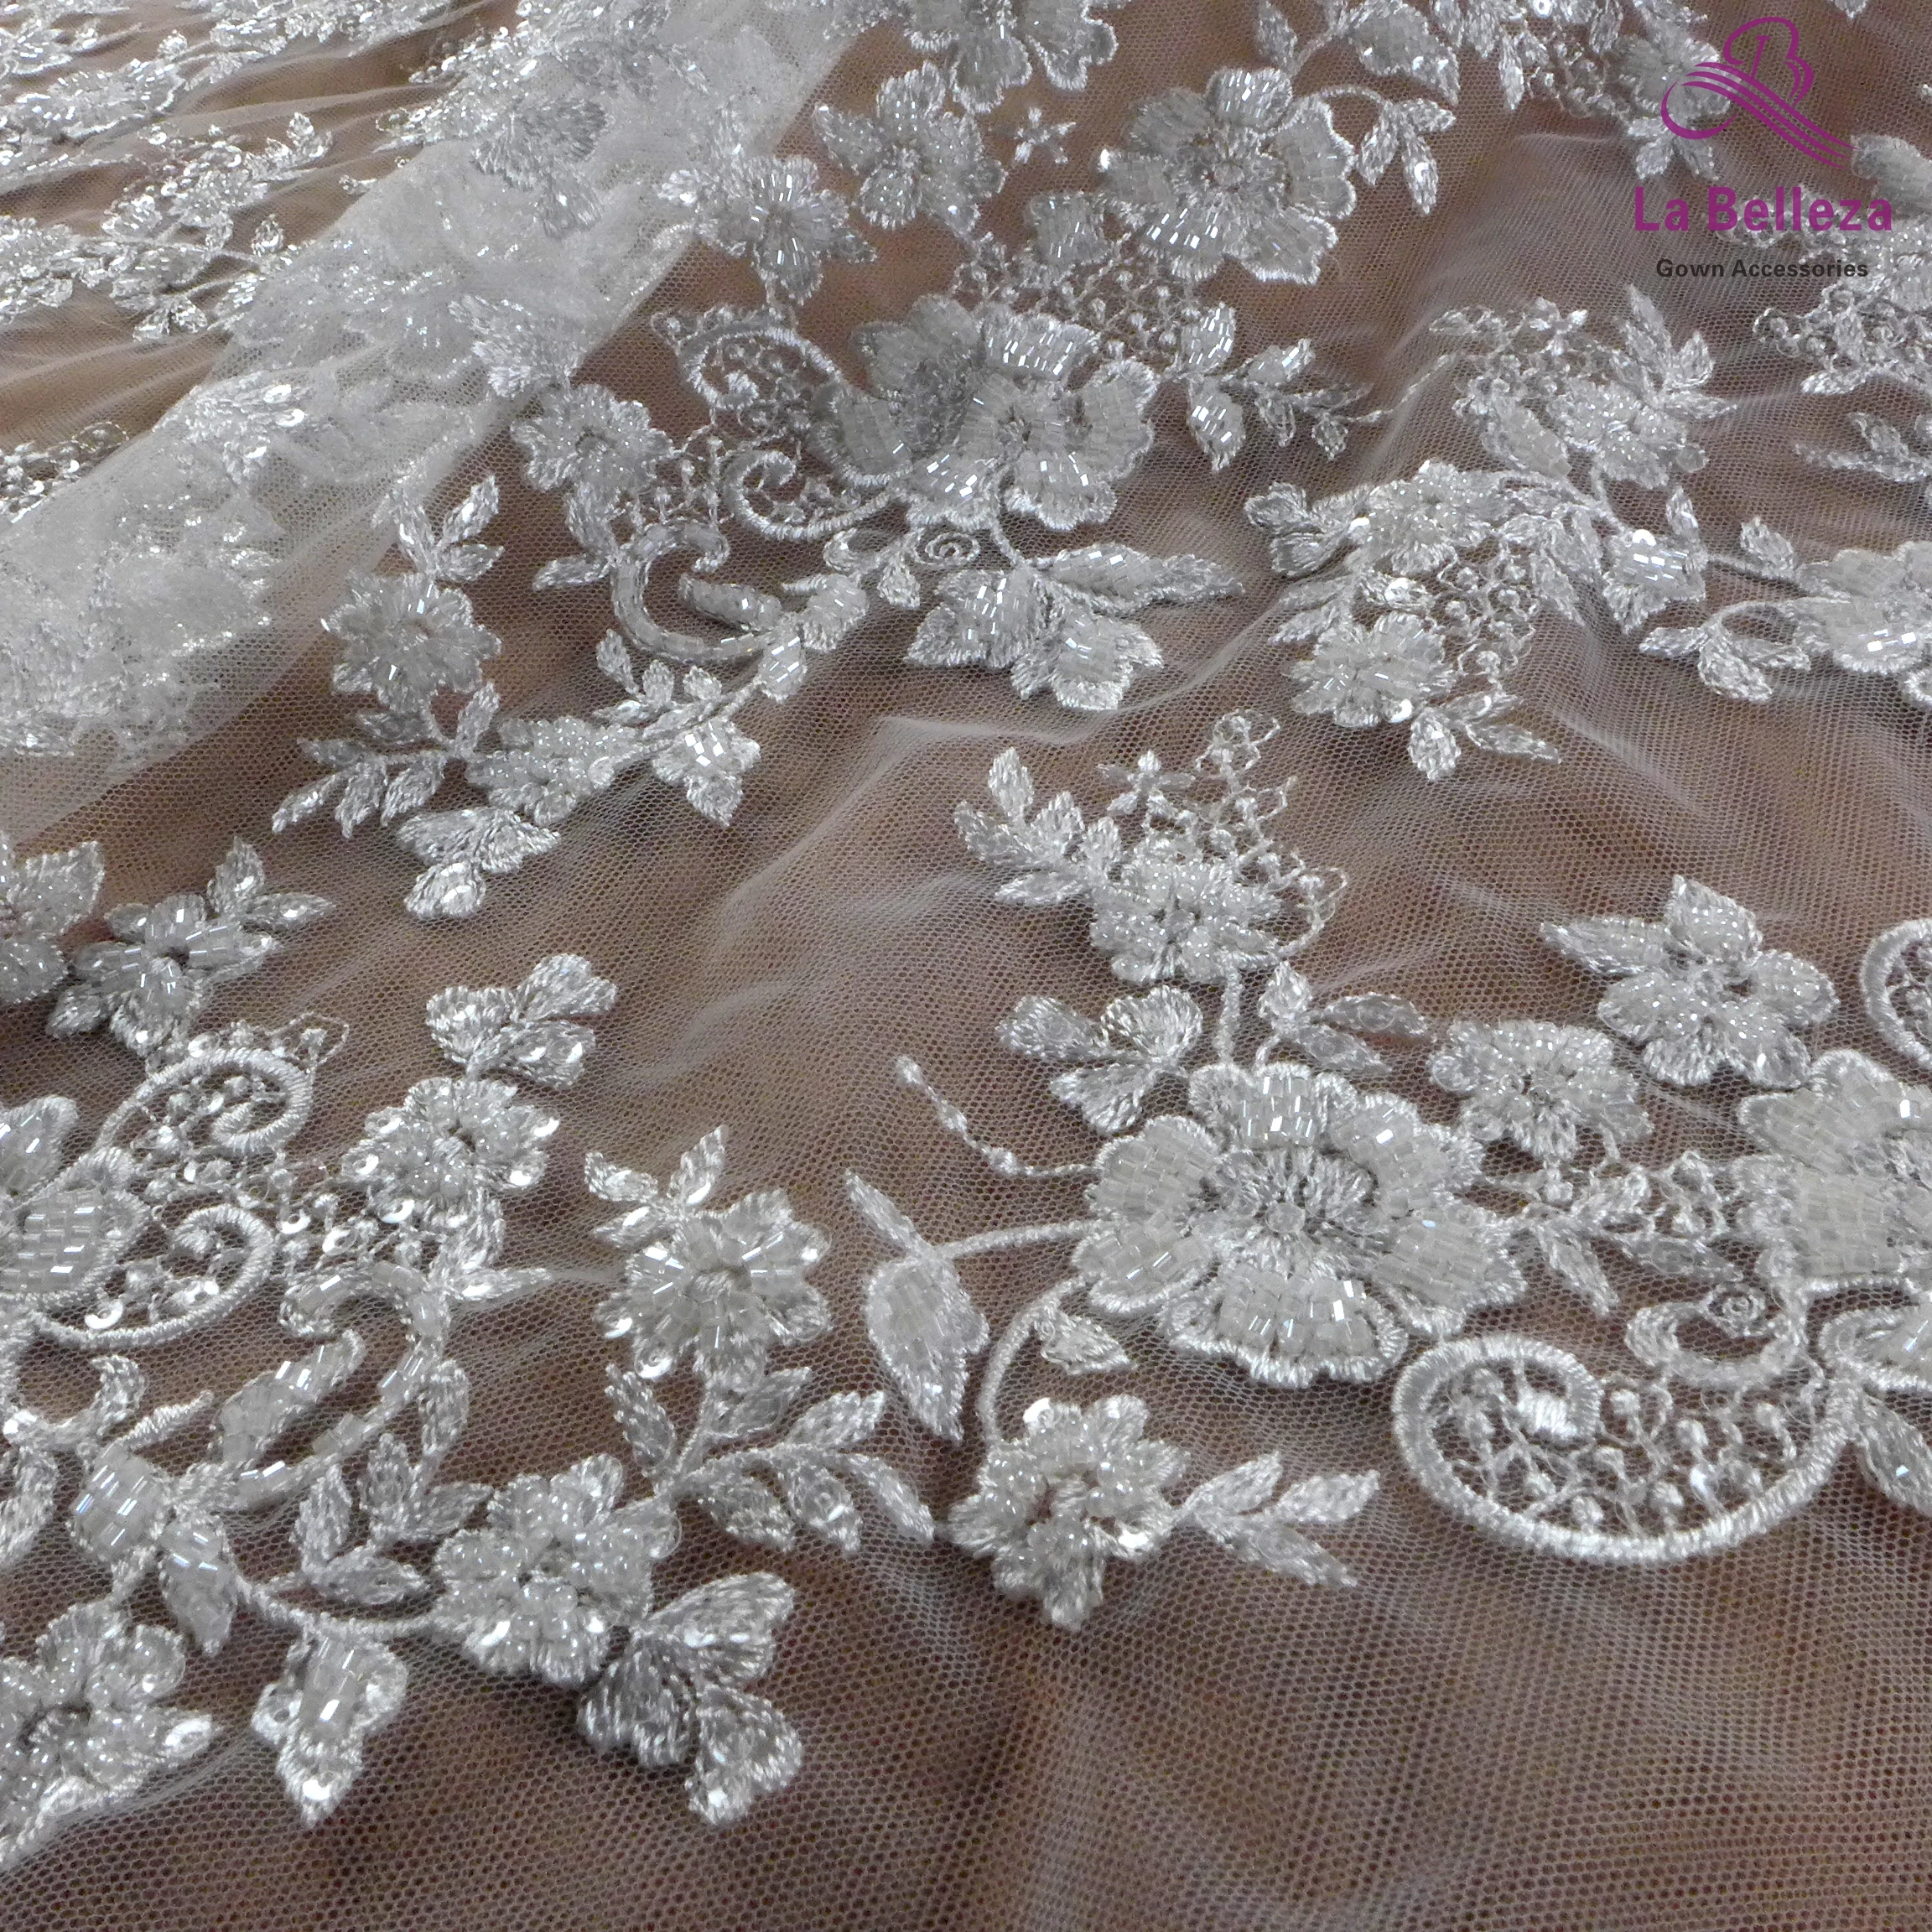 1-yard-high-quality-white-heavy-beaded-sequin-fabric-floral-pattern-lace-fabric-wedding-dress-cut